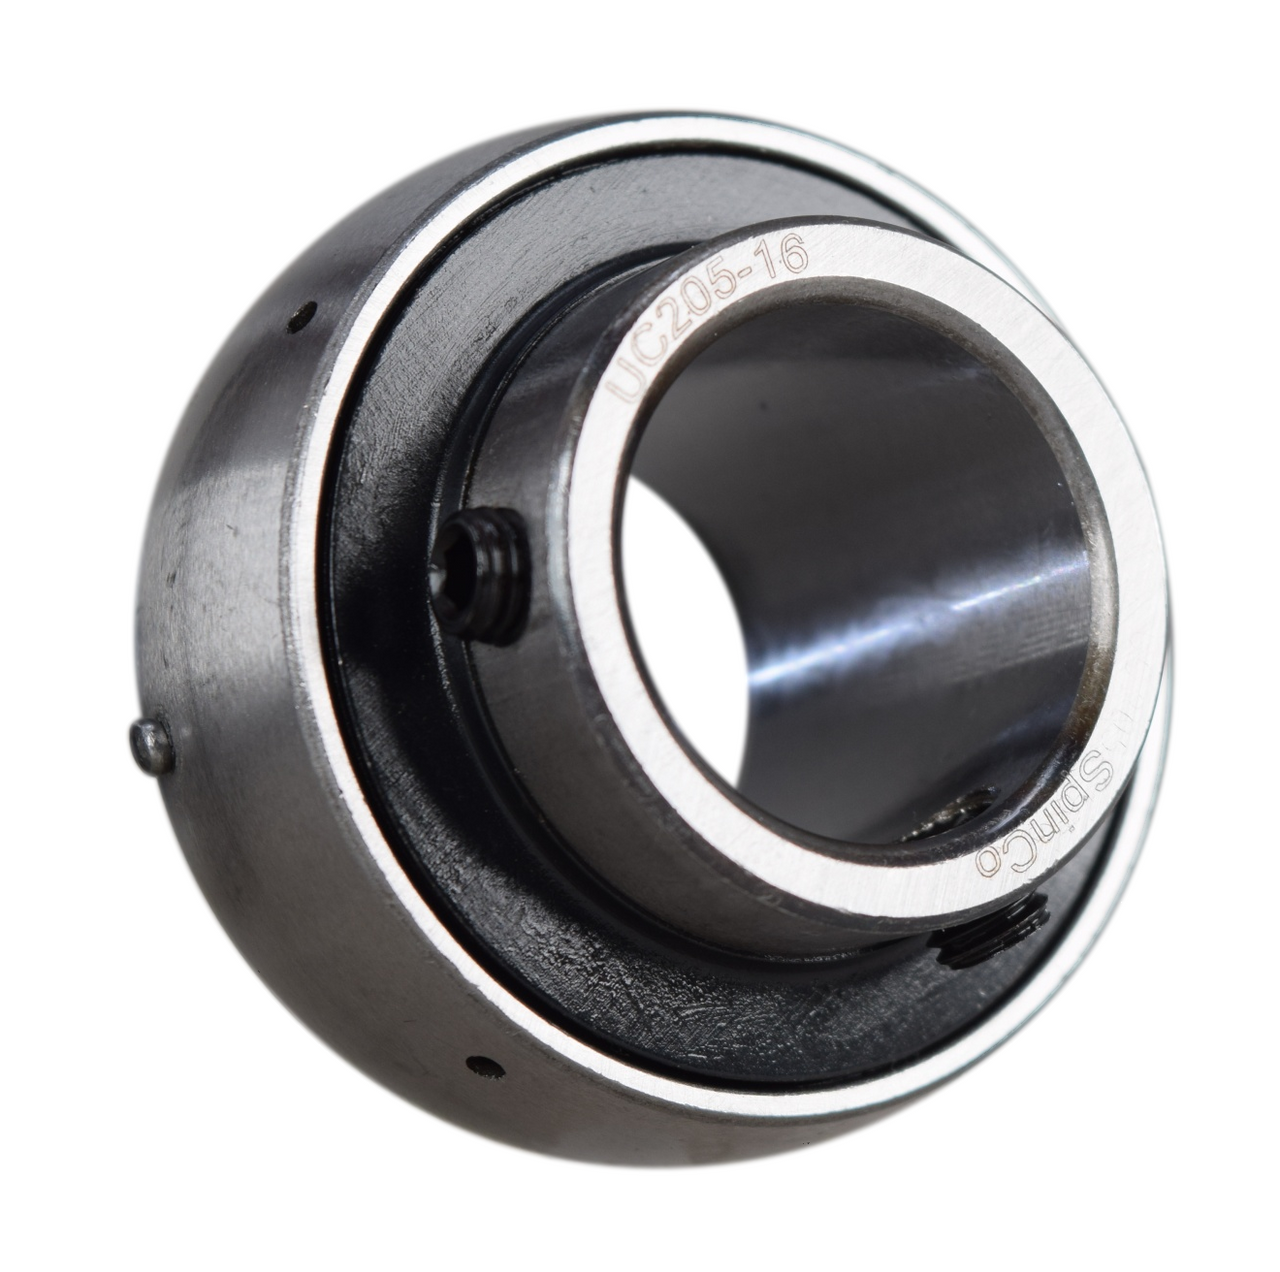 UC205-16 Bearing Steel Compact Anti-Rust for Industry Machinery Tool Heavy Duty Ball Bearing Insert 